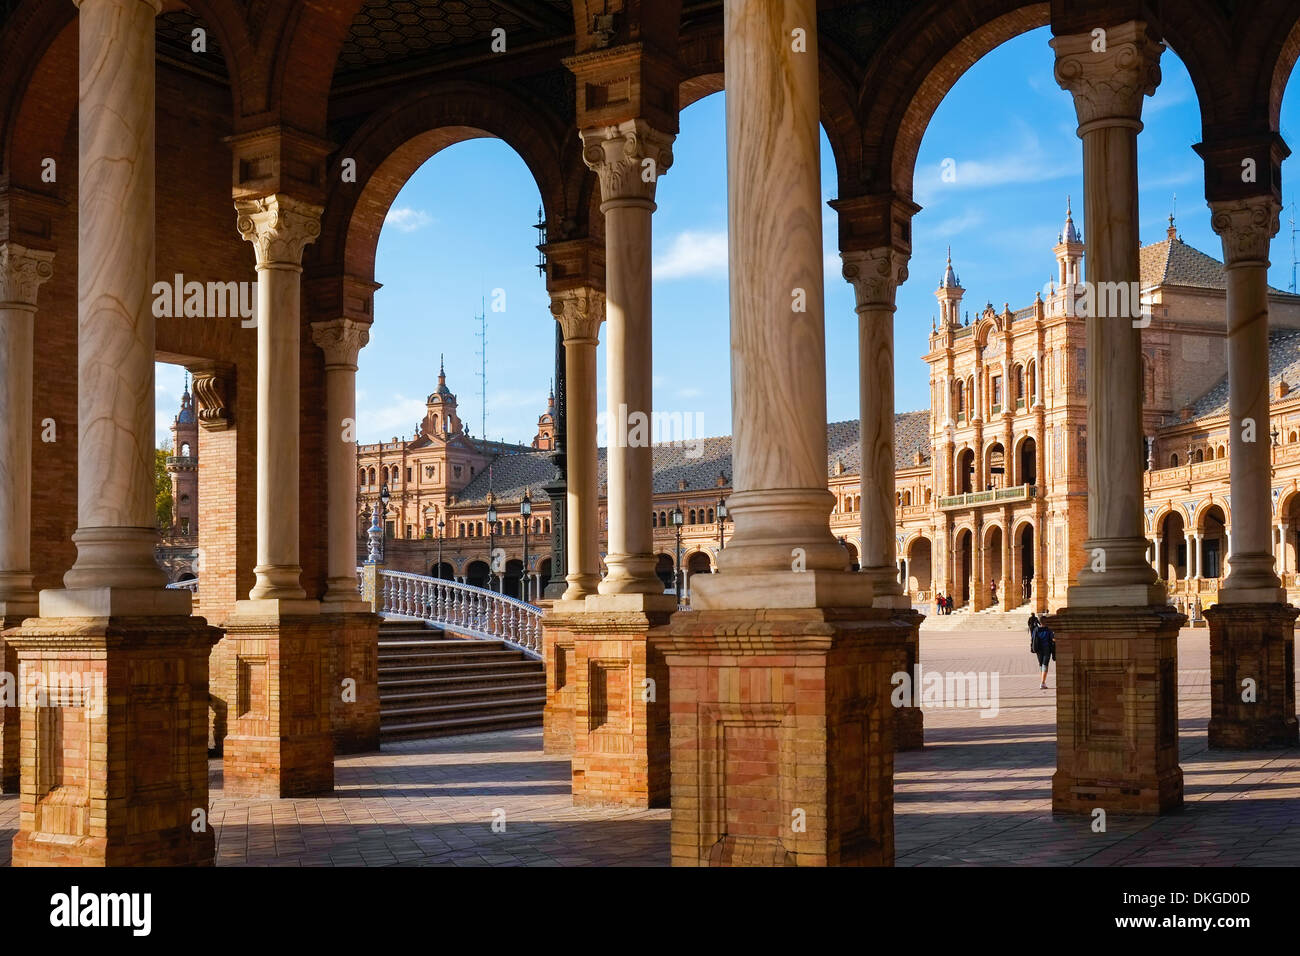 Plaza de espana palace in Seville, Andalusia, Spain Stock Photo